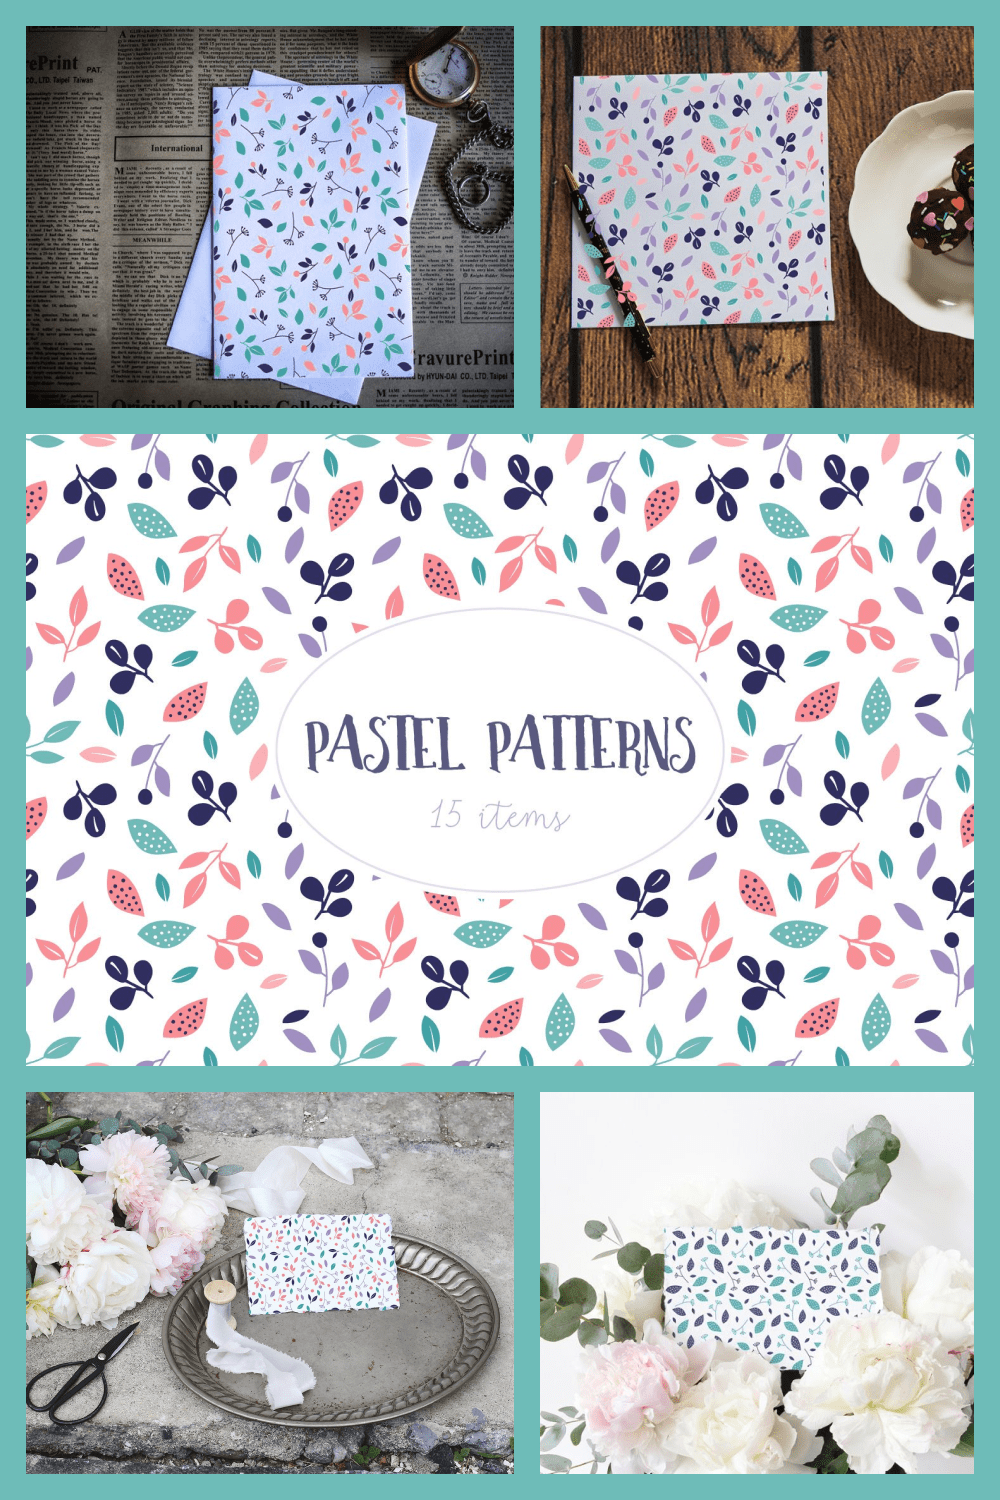 This Pastel Patterns bundle is a collection of 15 floral seamless patterns, with delicate colors and feminine florals.